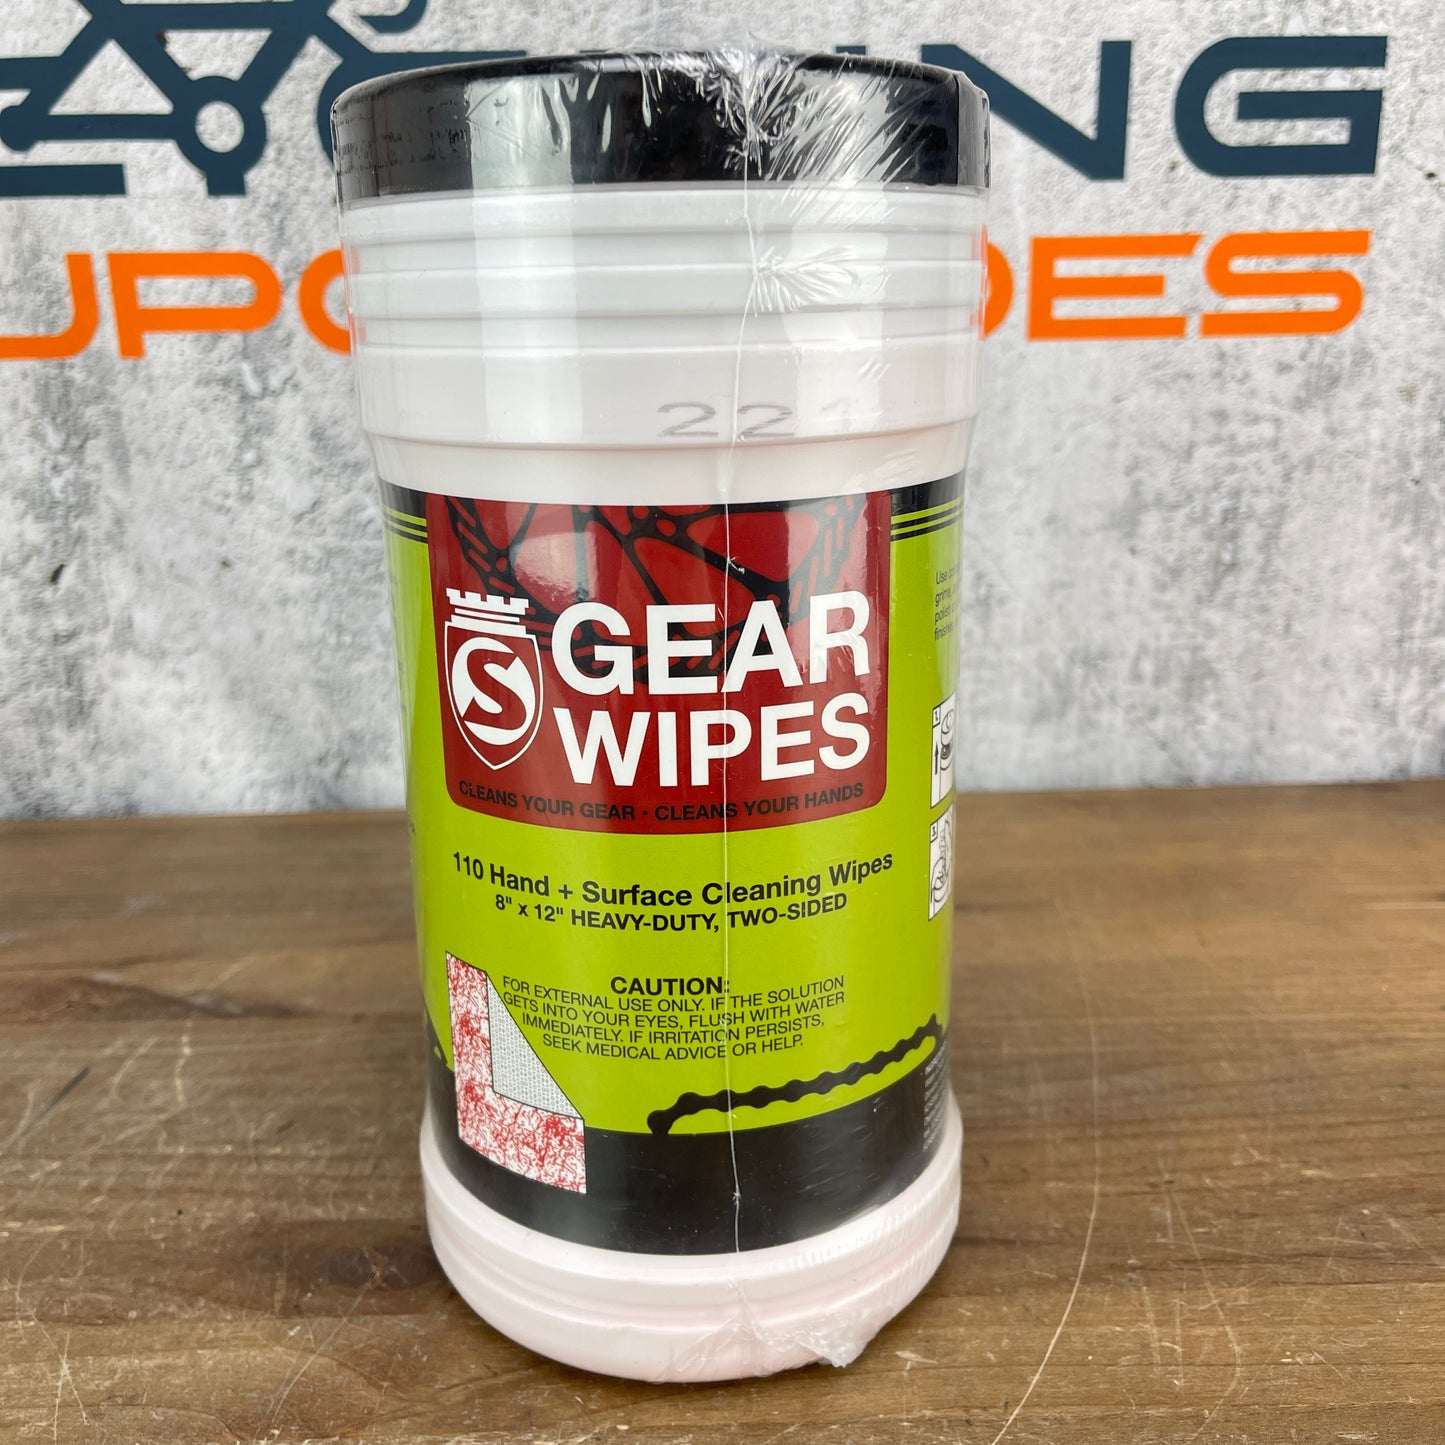 New! Silca Gear Wipes Canister 110 Hand + Surface Cleaning Wipes